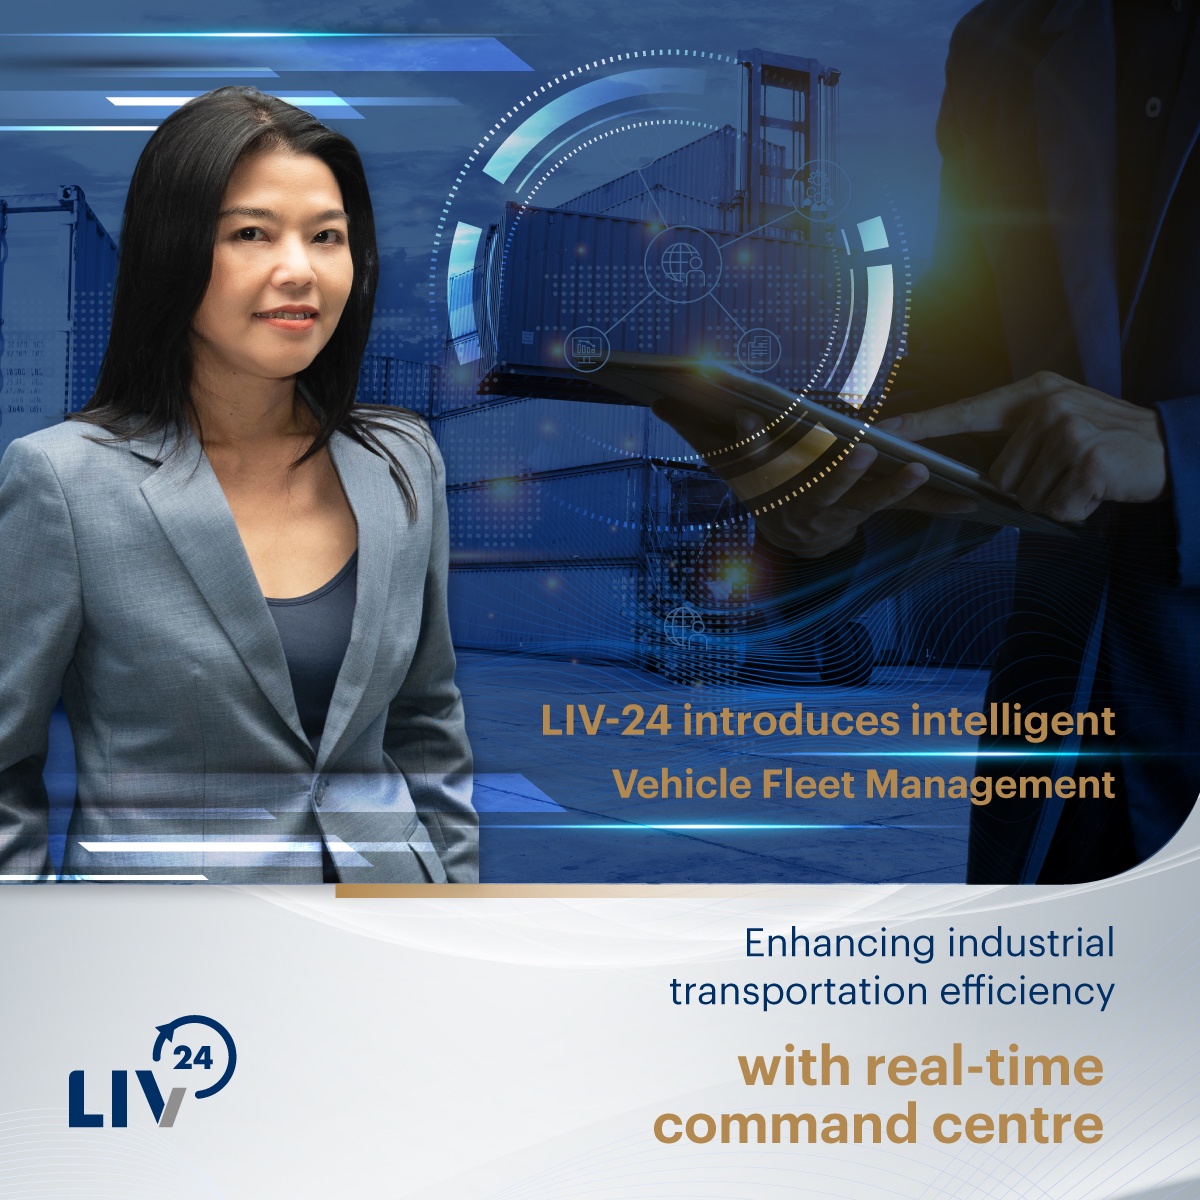 LIV-24 introduces intelligent 'Vehicle Fleet Management' technology Enhancing industrial transportation efficiency with real-time command